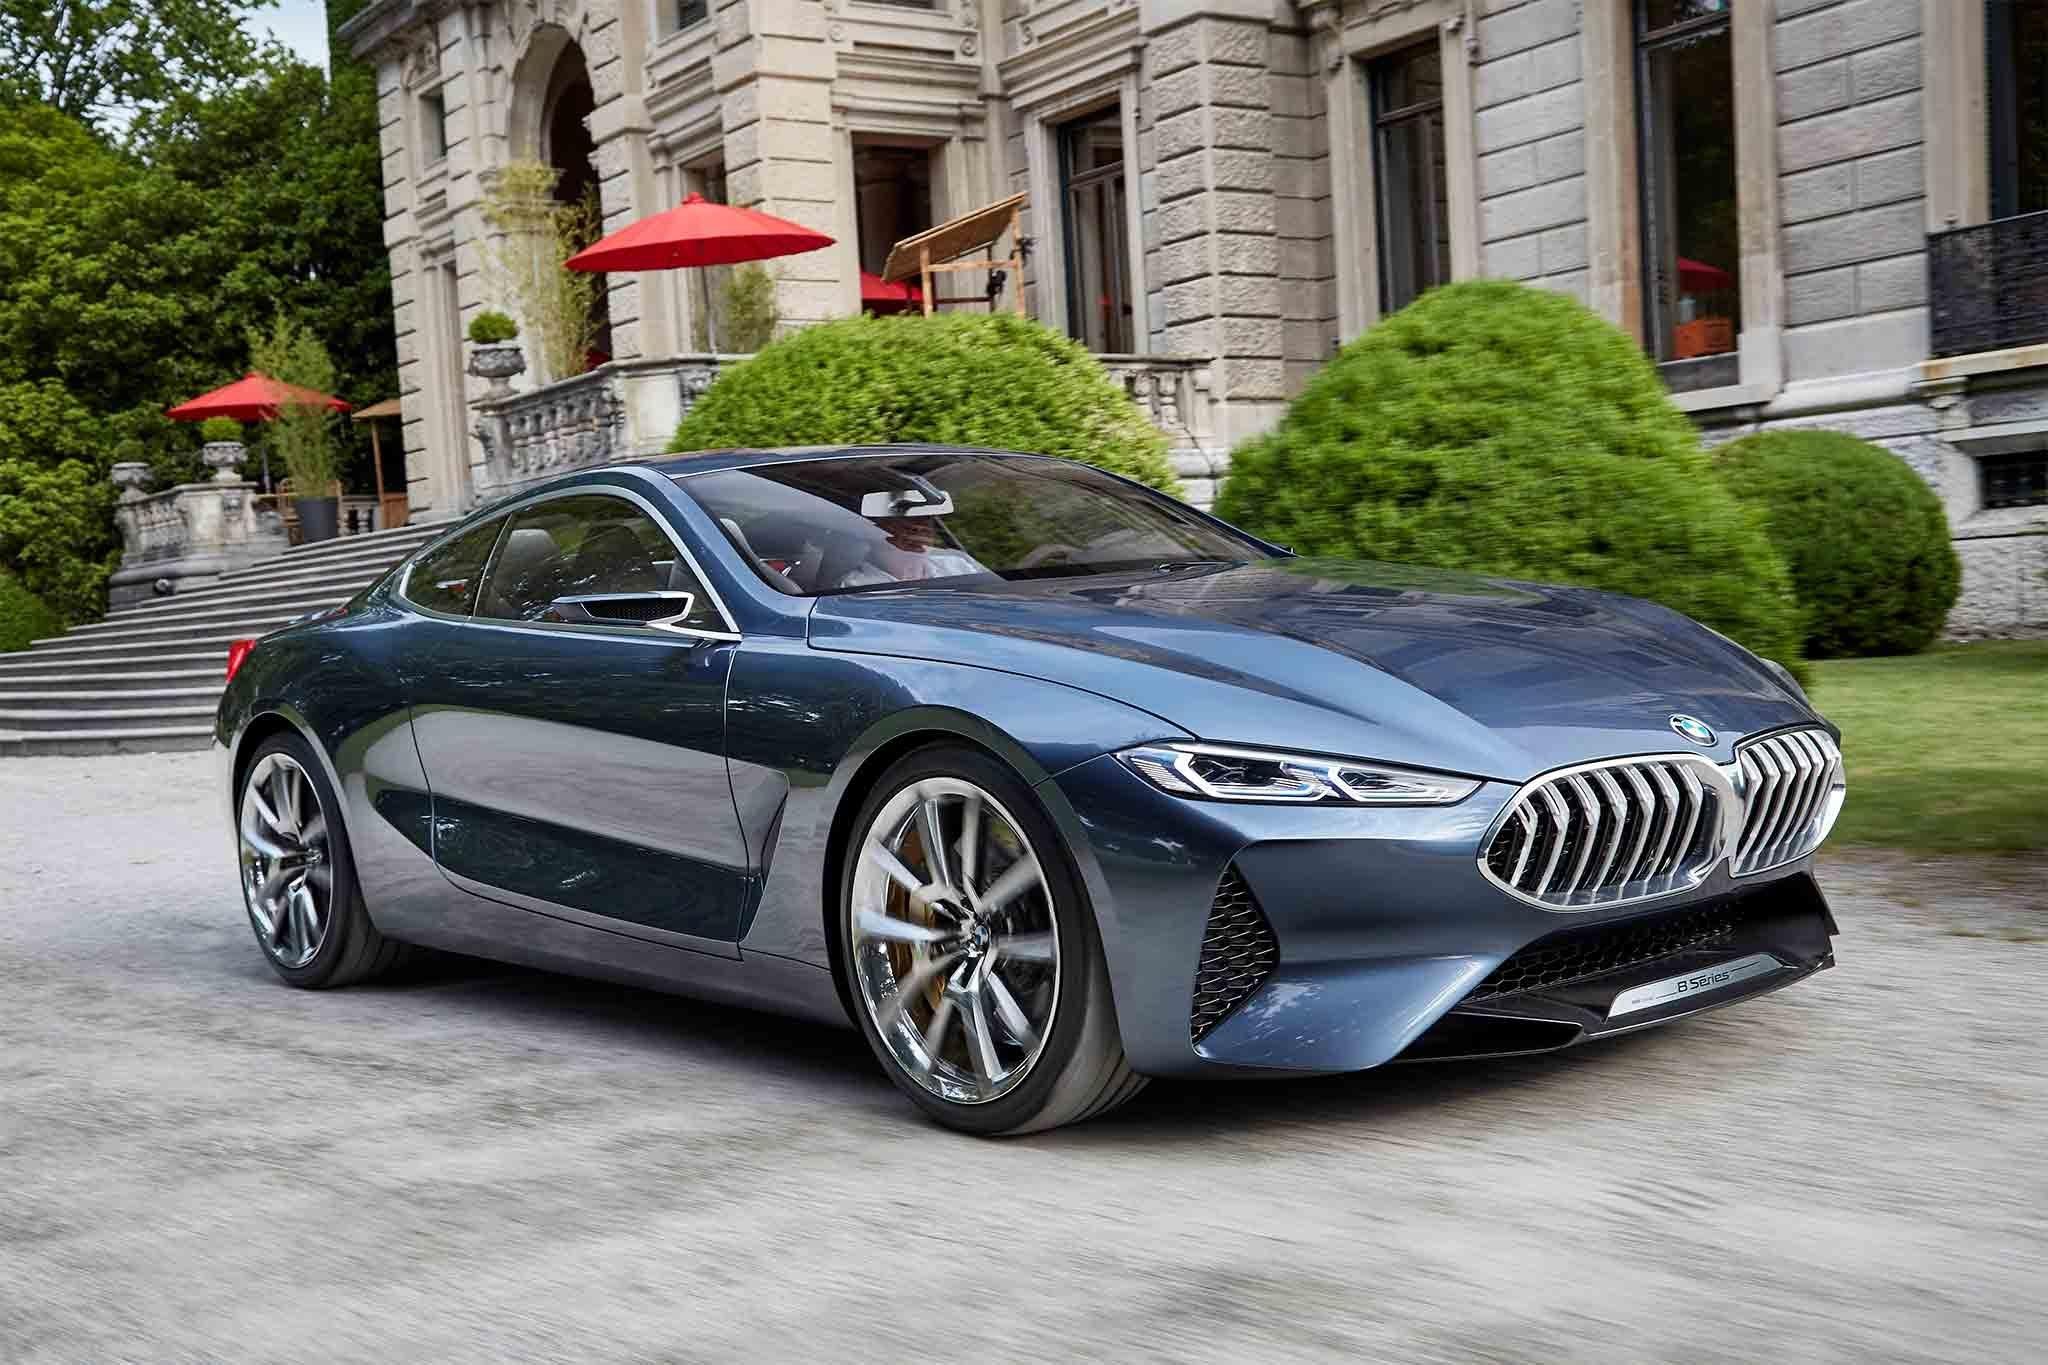 The 2019 Bmw 8 Series Coupe: Is It Ever Enough For Bmw? Release Date